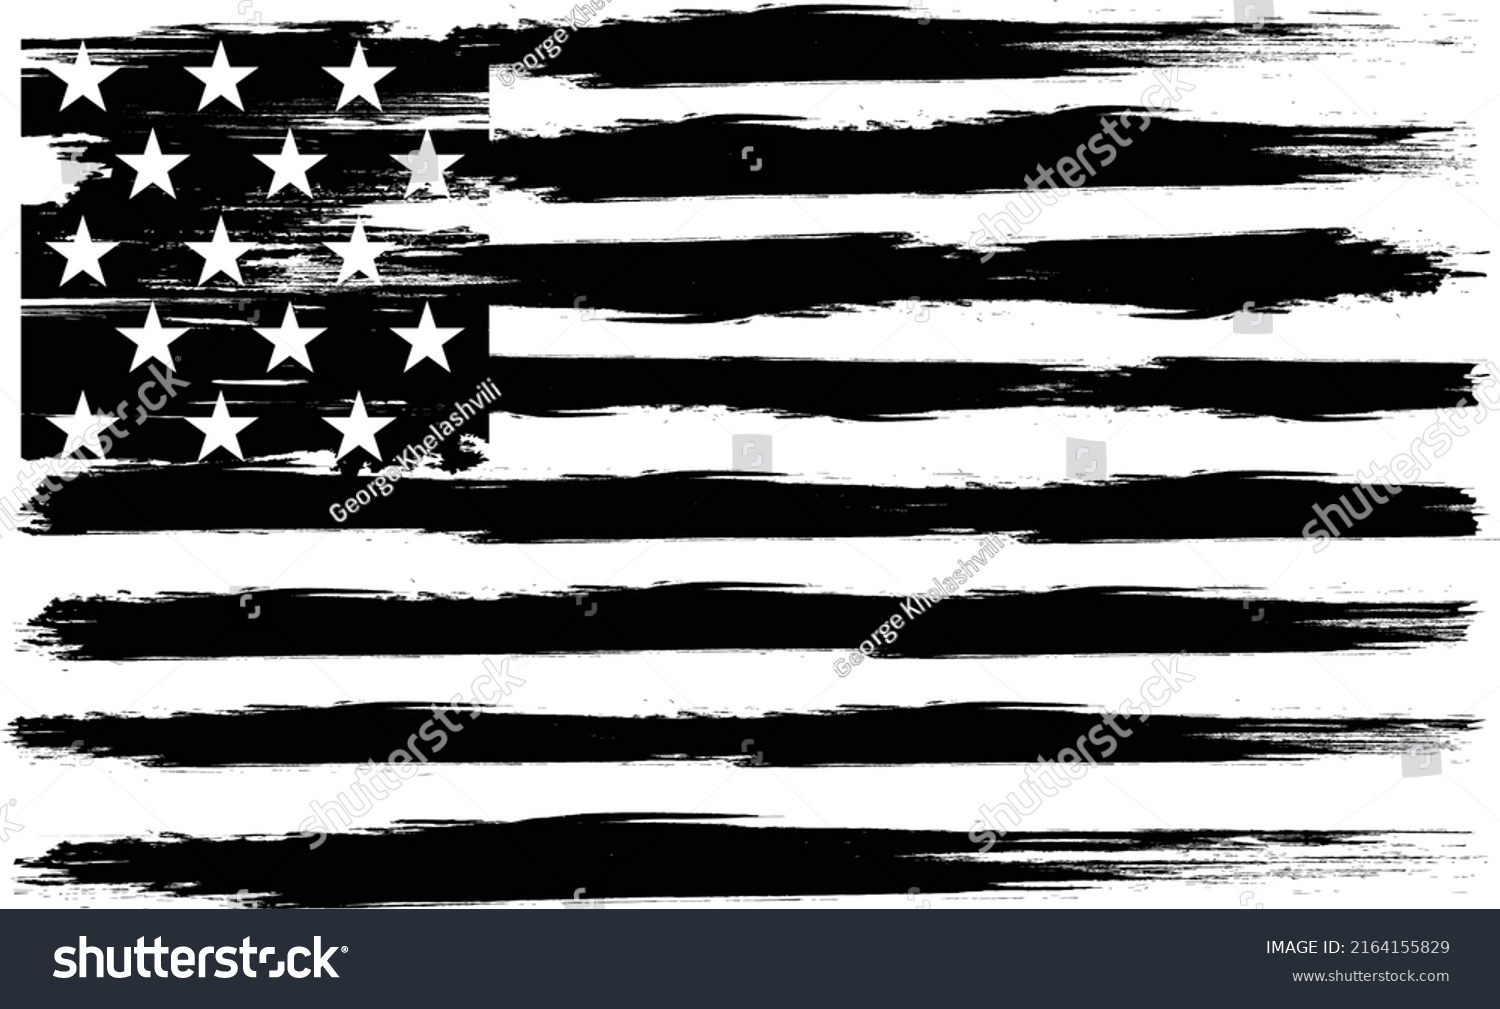 SVG of Vector Of The Distressed American Flag svg